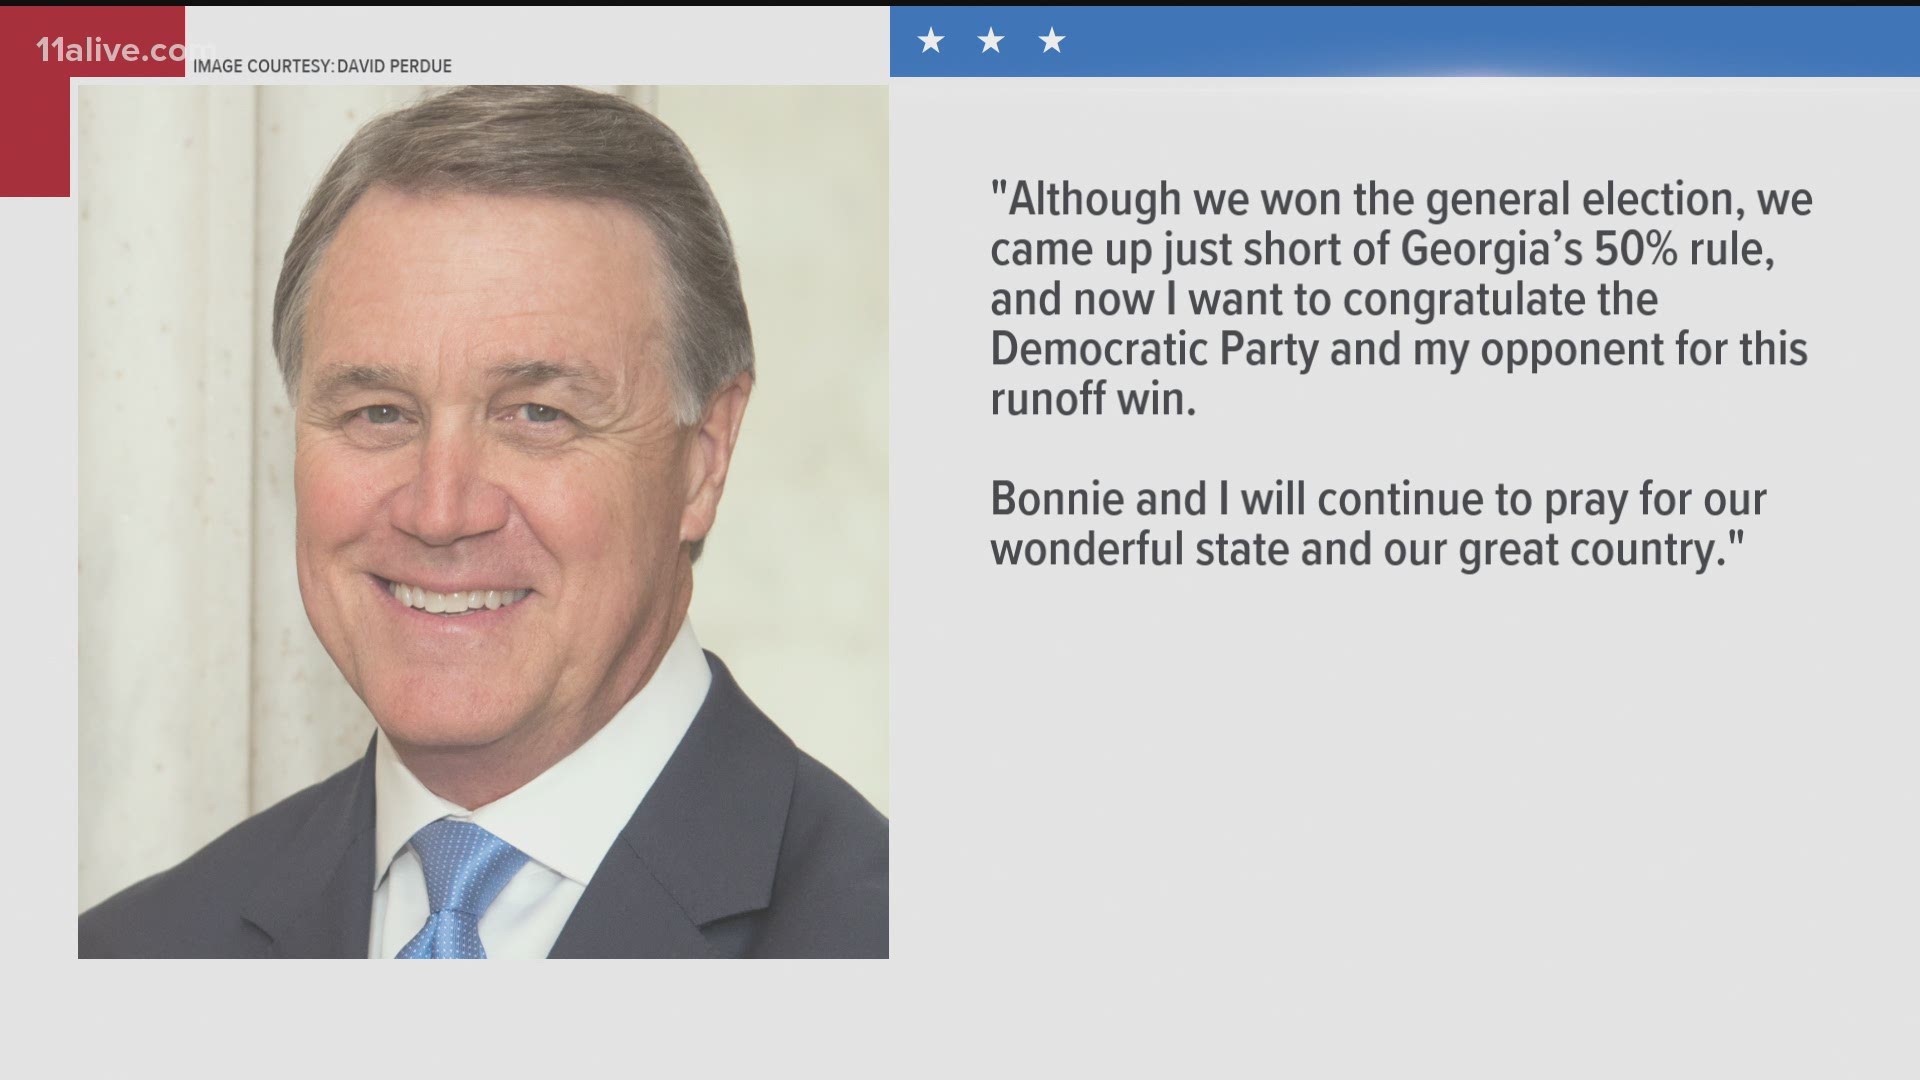 While the final tally is not yet official, Republican David Perdue conceded. Kemp also tweeted his congratulations.